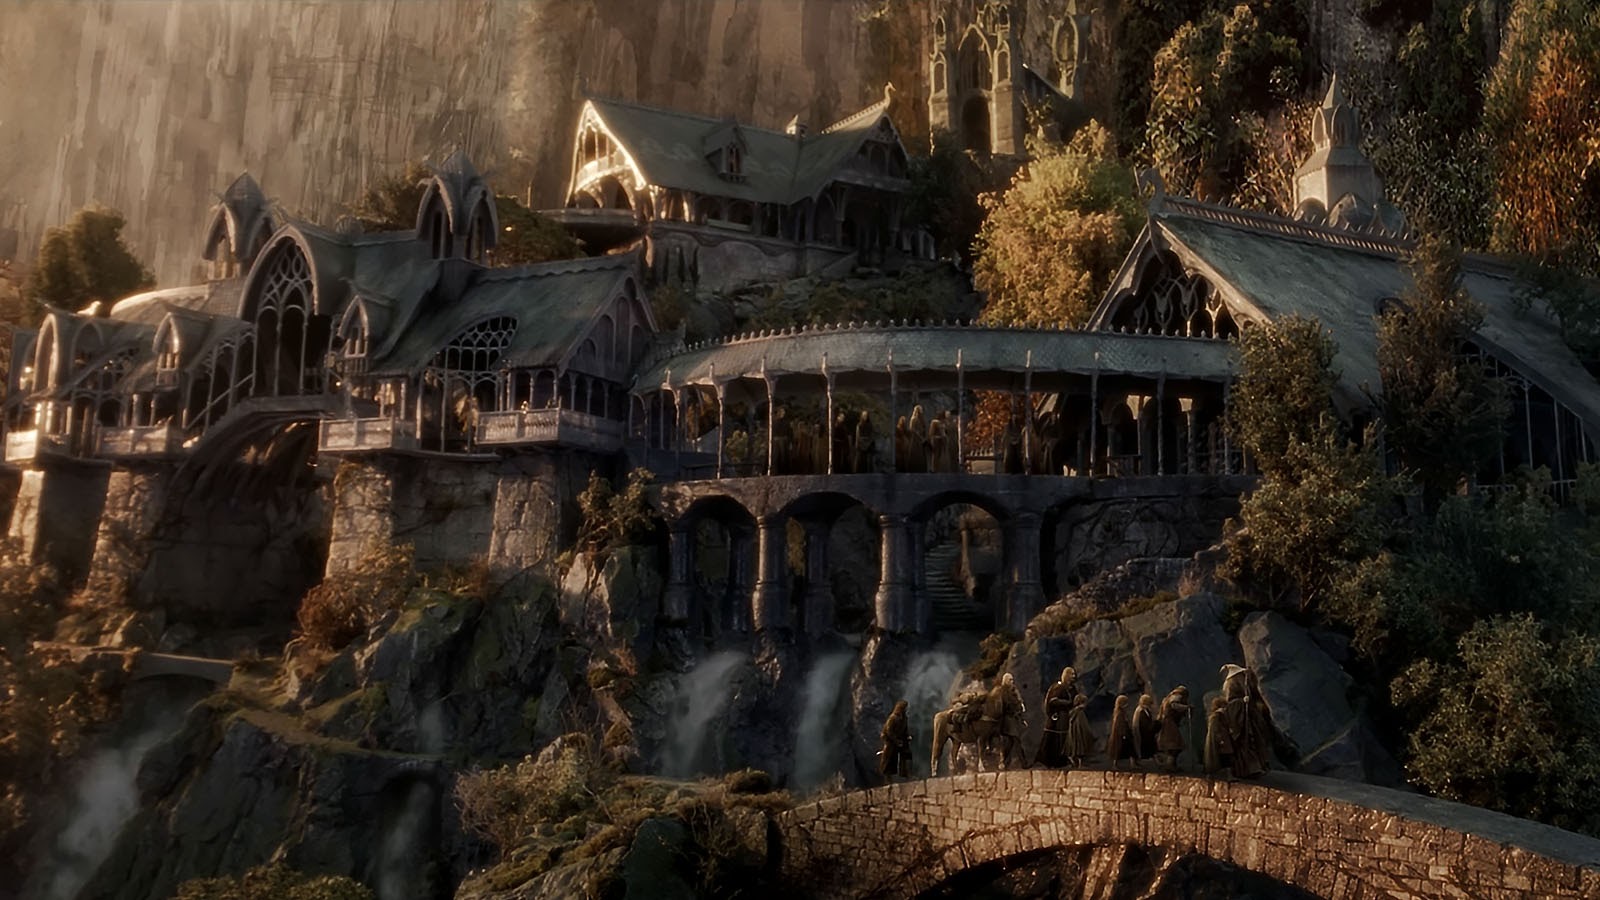 The fellowship leaves Rivendell in a vfx composite using live action and LOTR’s famous ‘bigatures.’ Image © New Line Cinema